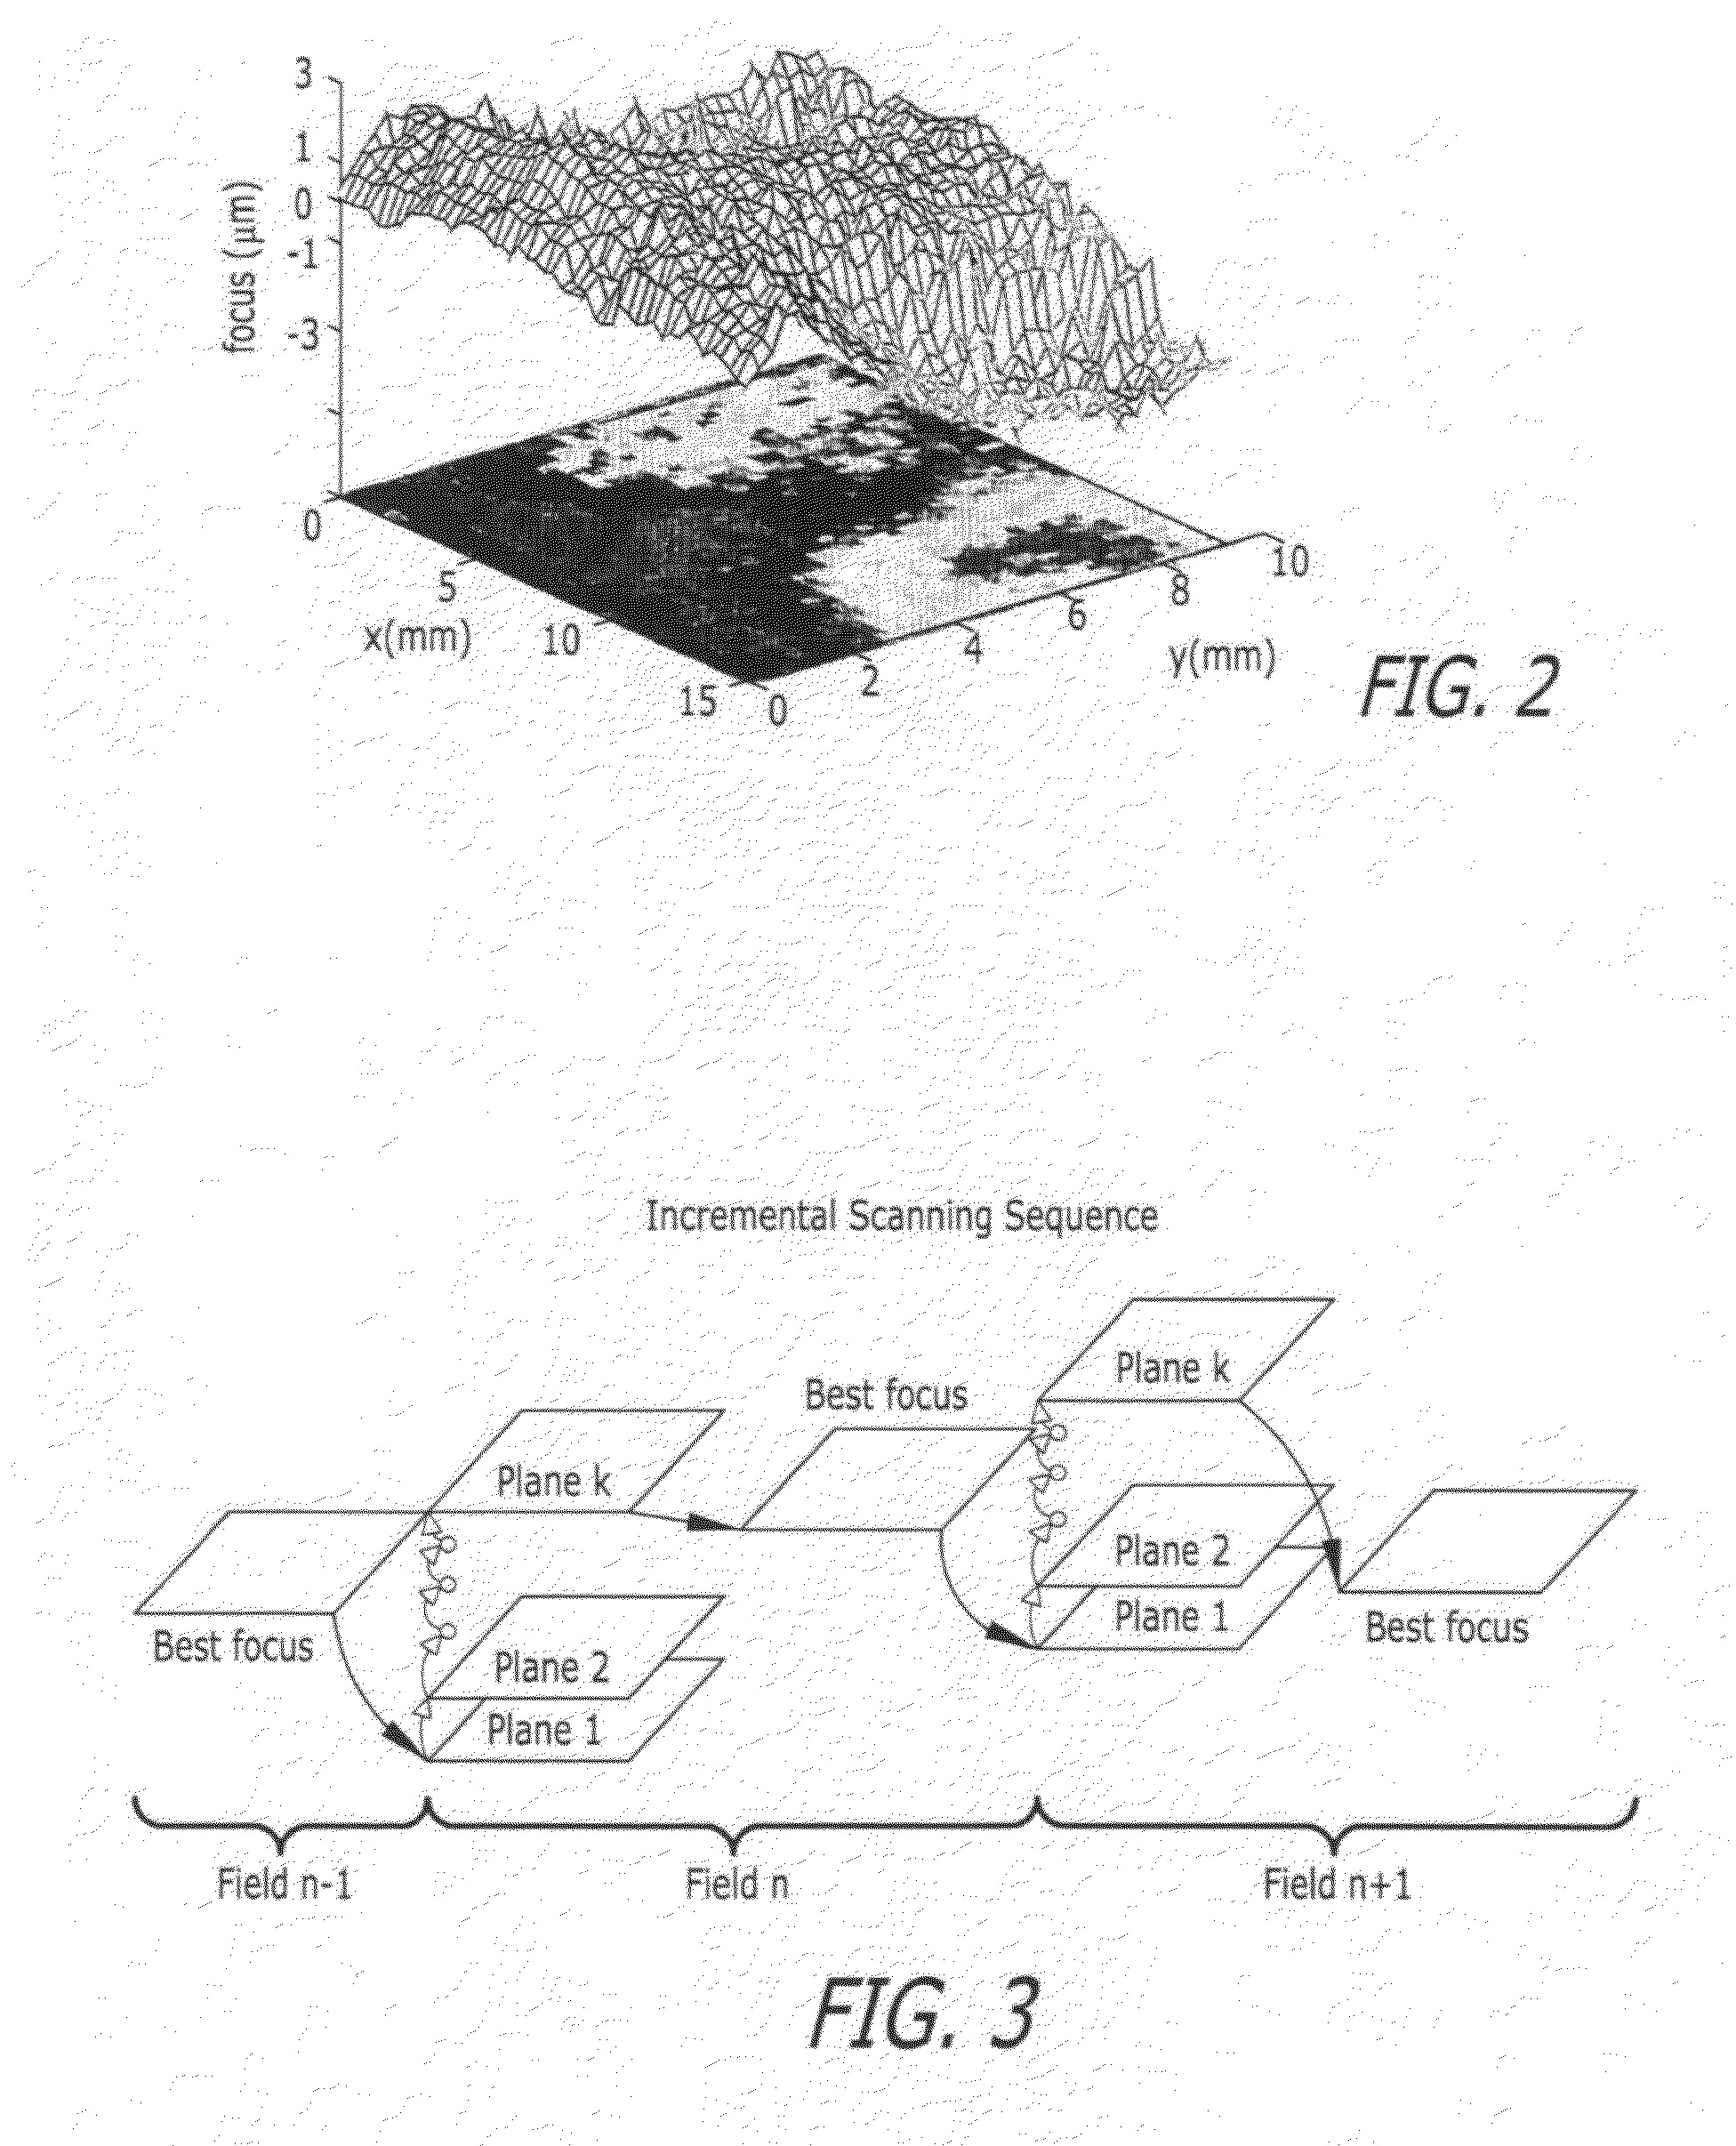 System and method for automatic color segmentation and minimum significant response for measurement of fractional localized intensity of cellular compartments